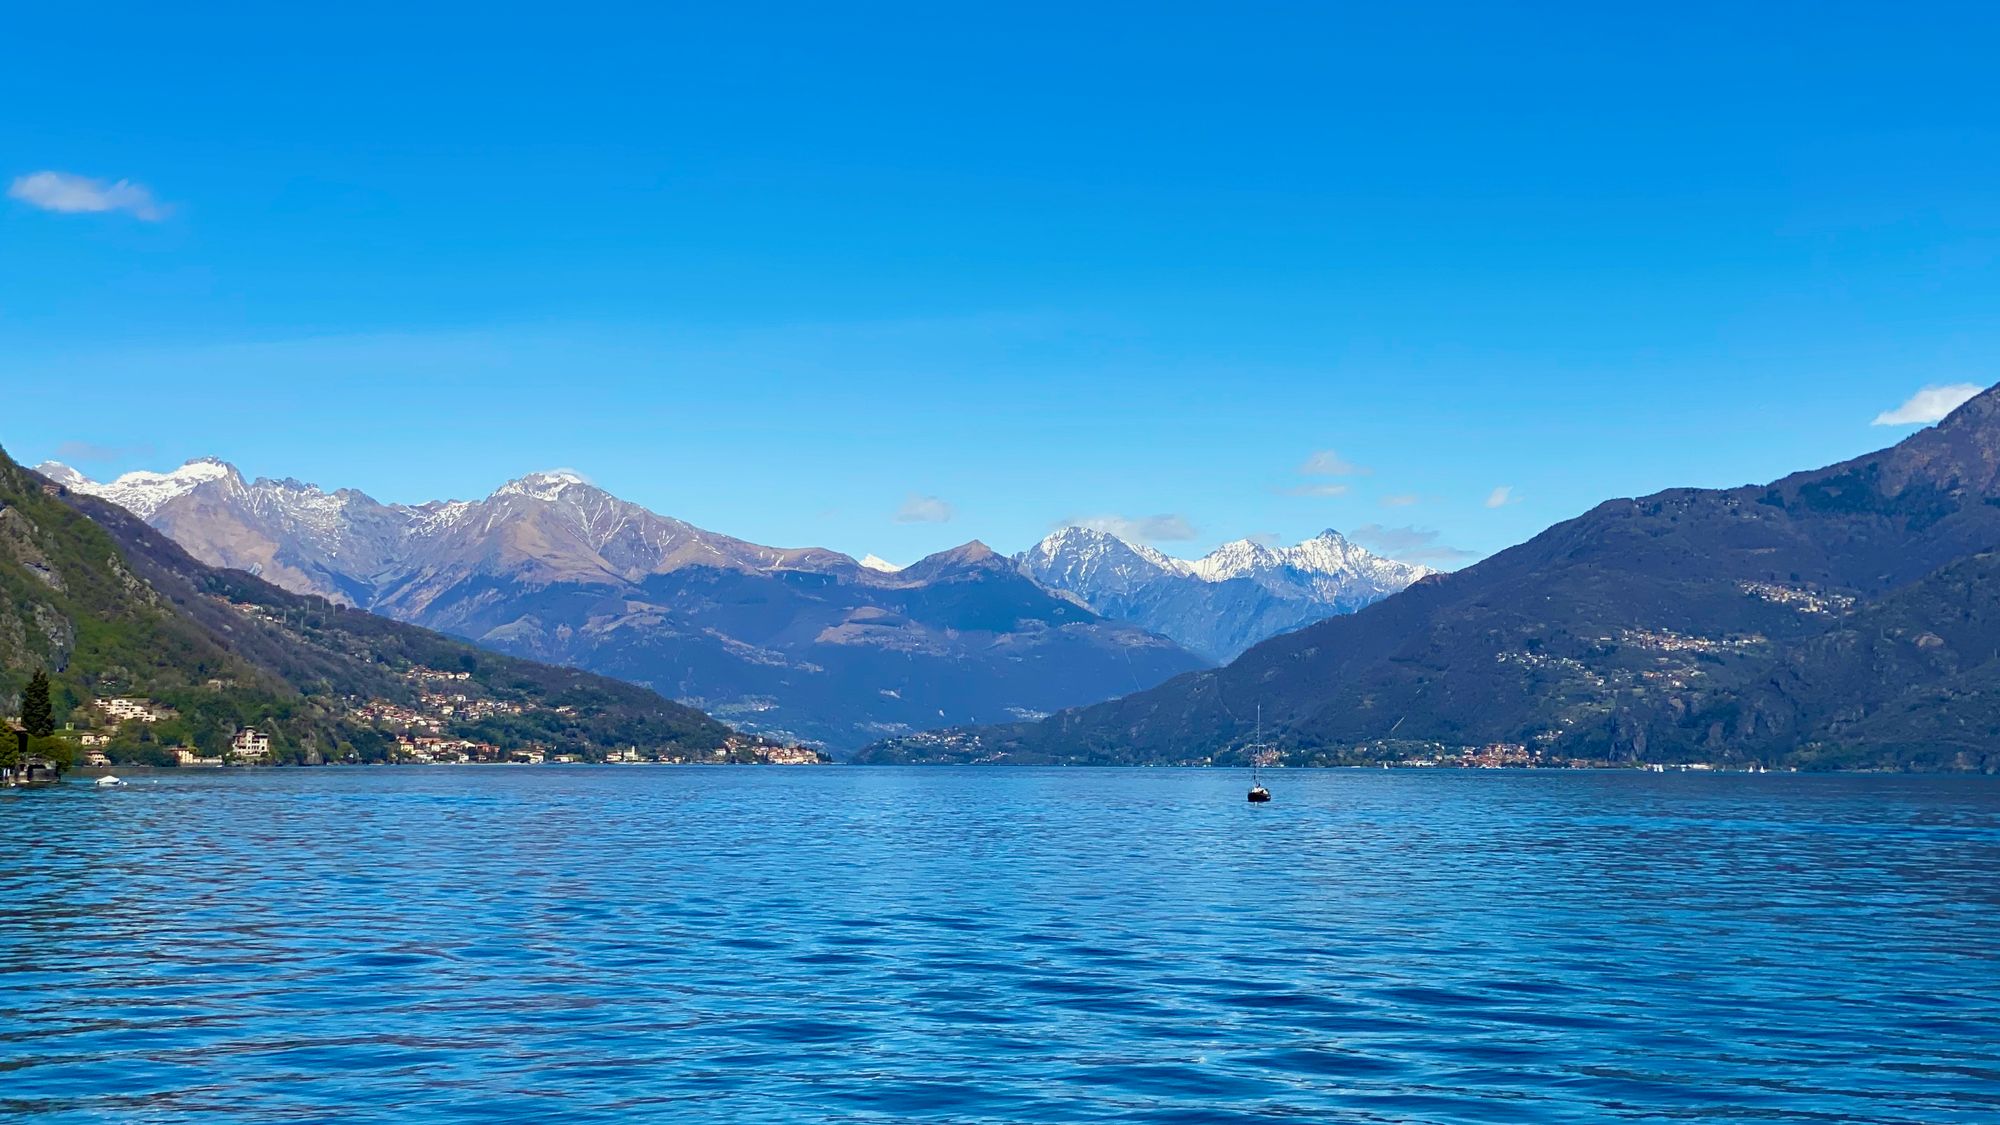 On the ferry in the middle of Lake Como, going from Menaggio to Varenna